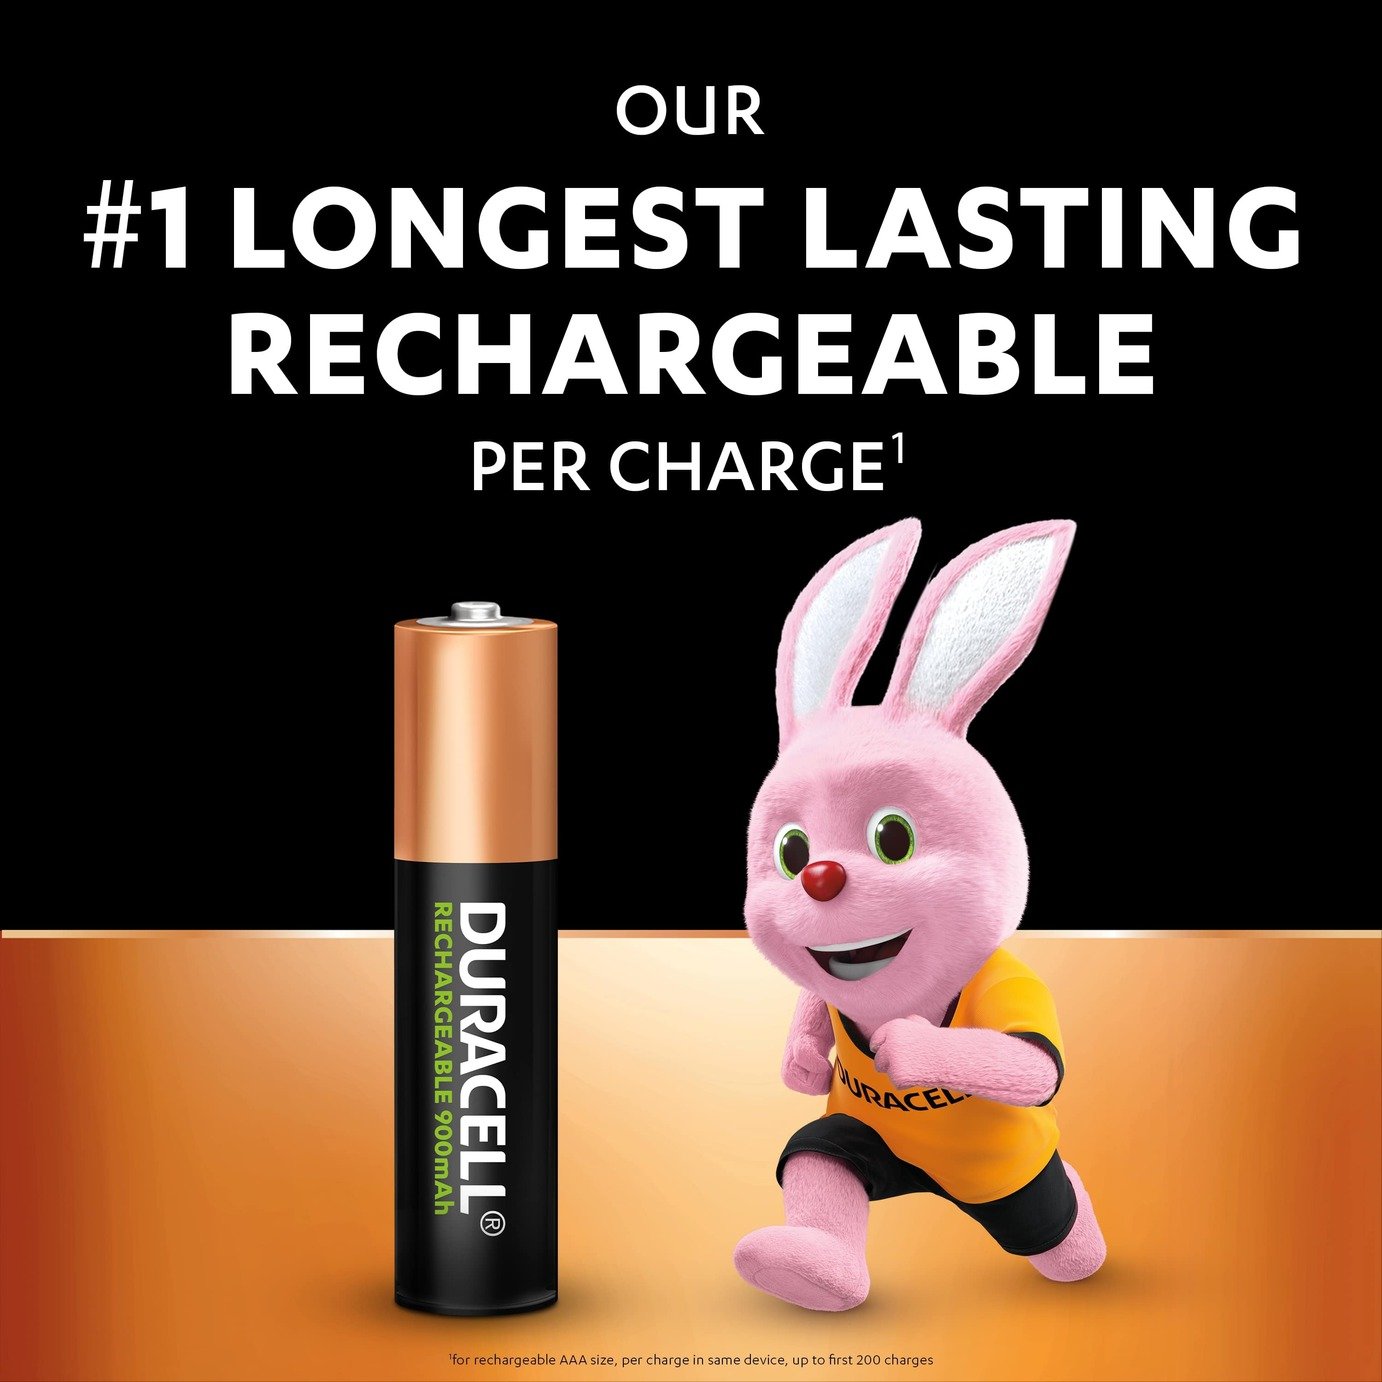 Duracell Rechargeable AAA 900mAh Batteries Review